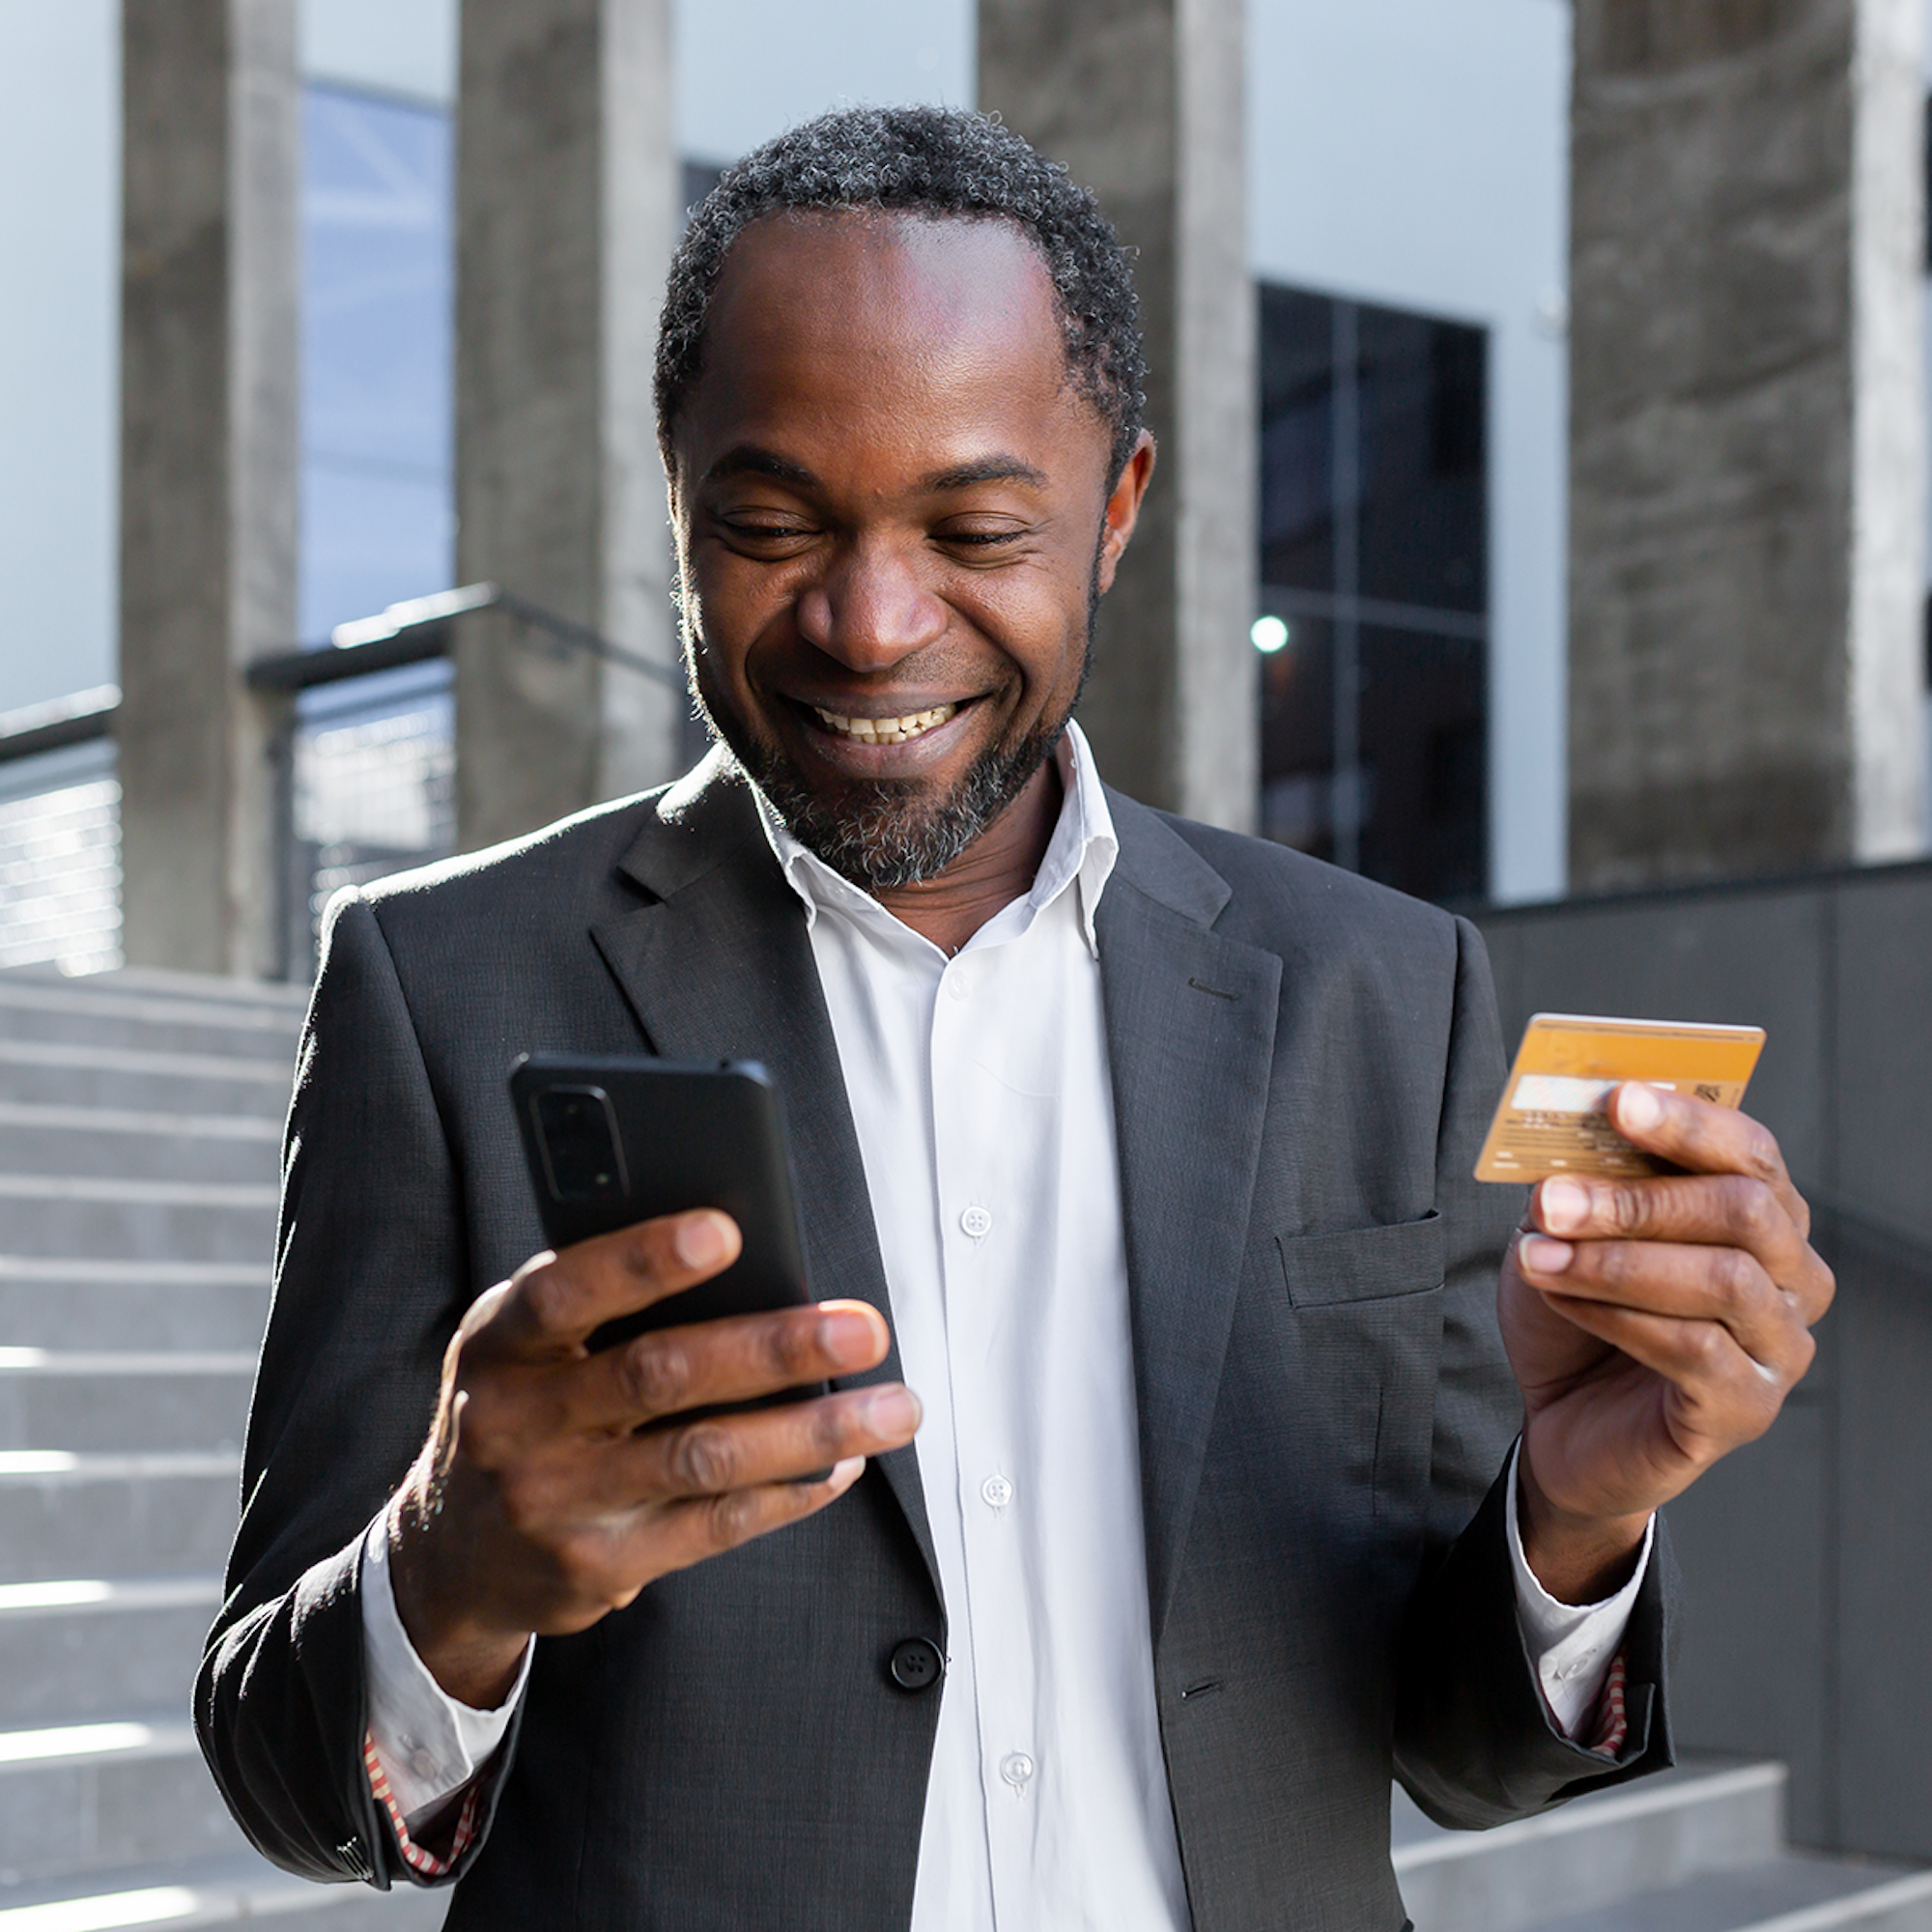 Man with phone and credit card in hand smiling